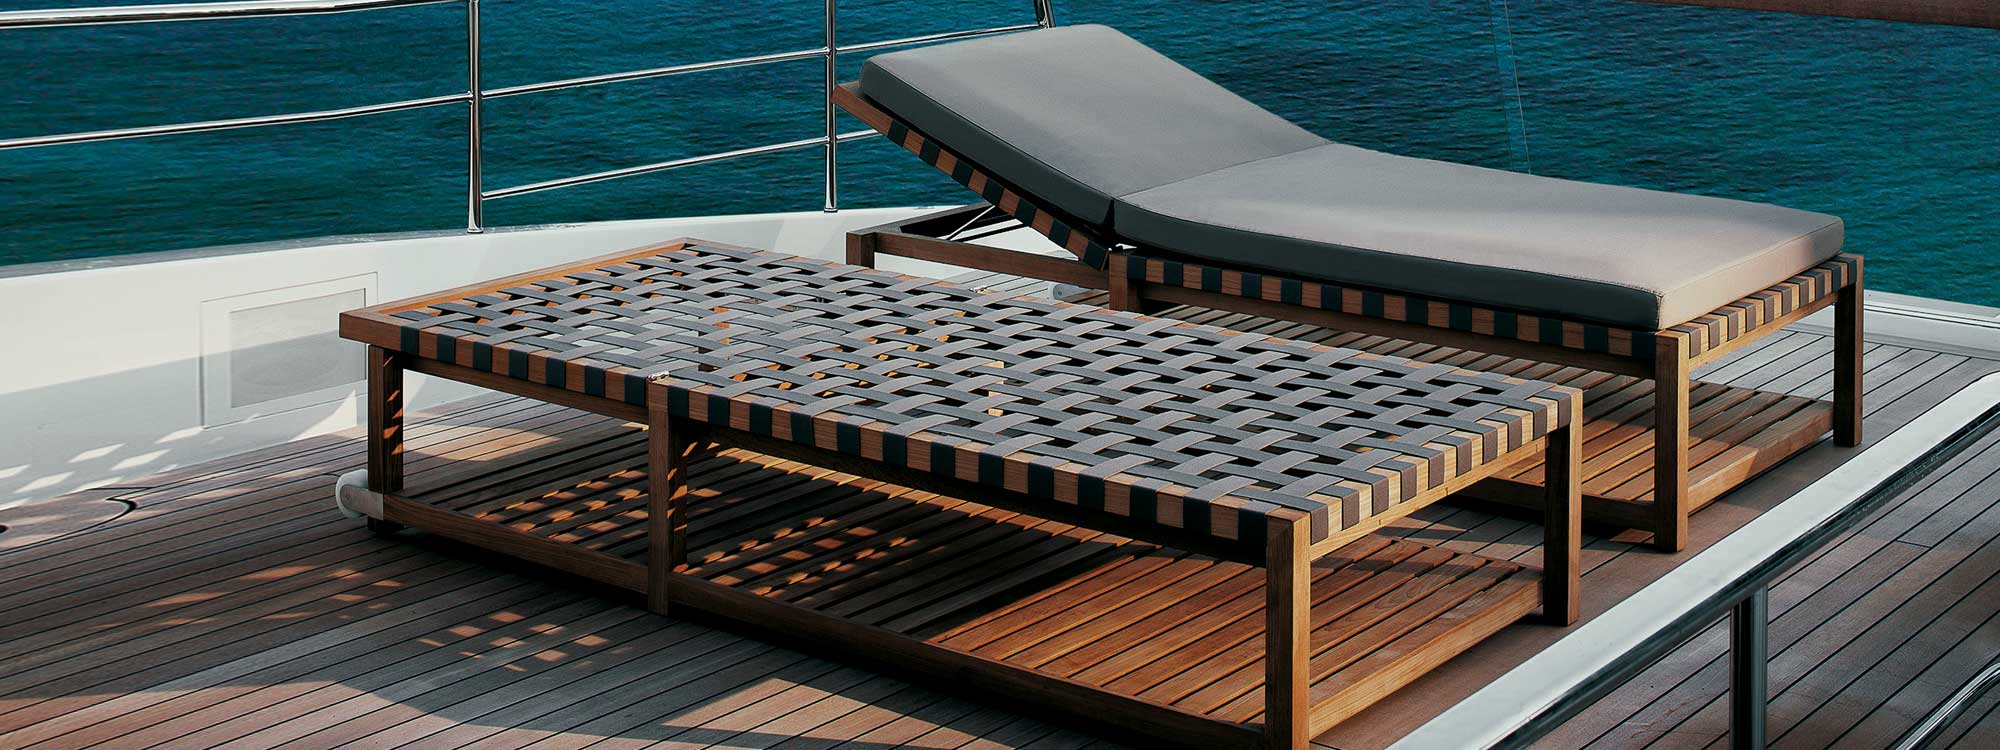 Image of pair of RODA Network teak sunbeds with Brown webbing and Brown cushion on deck of superyacht